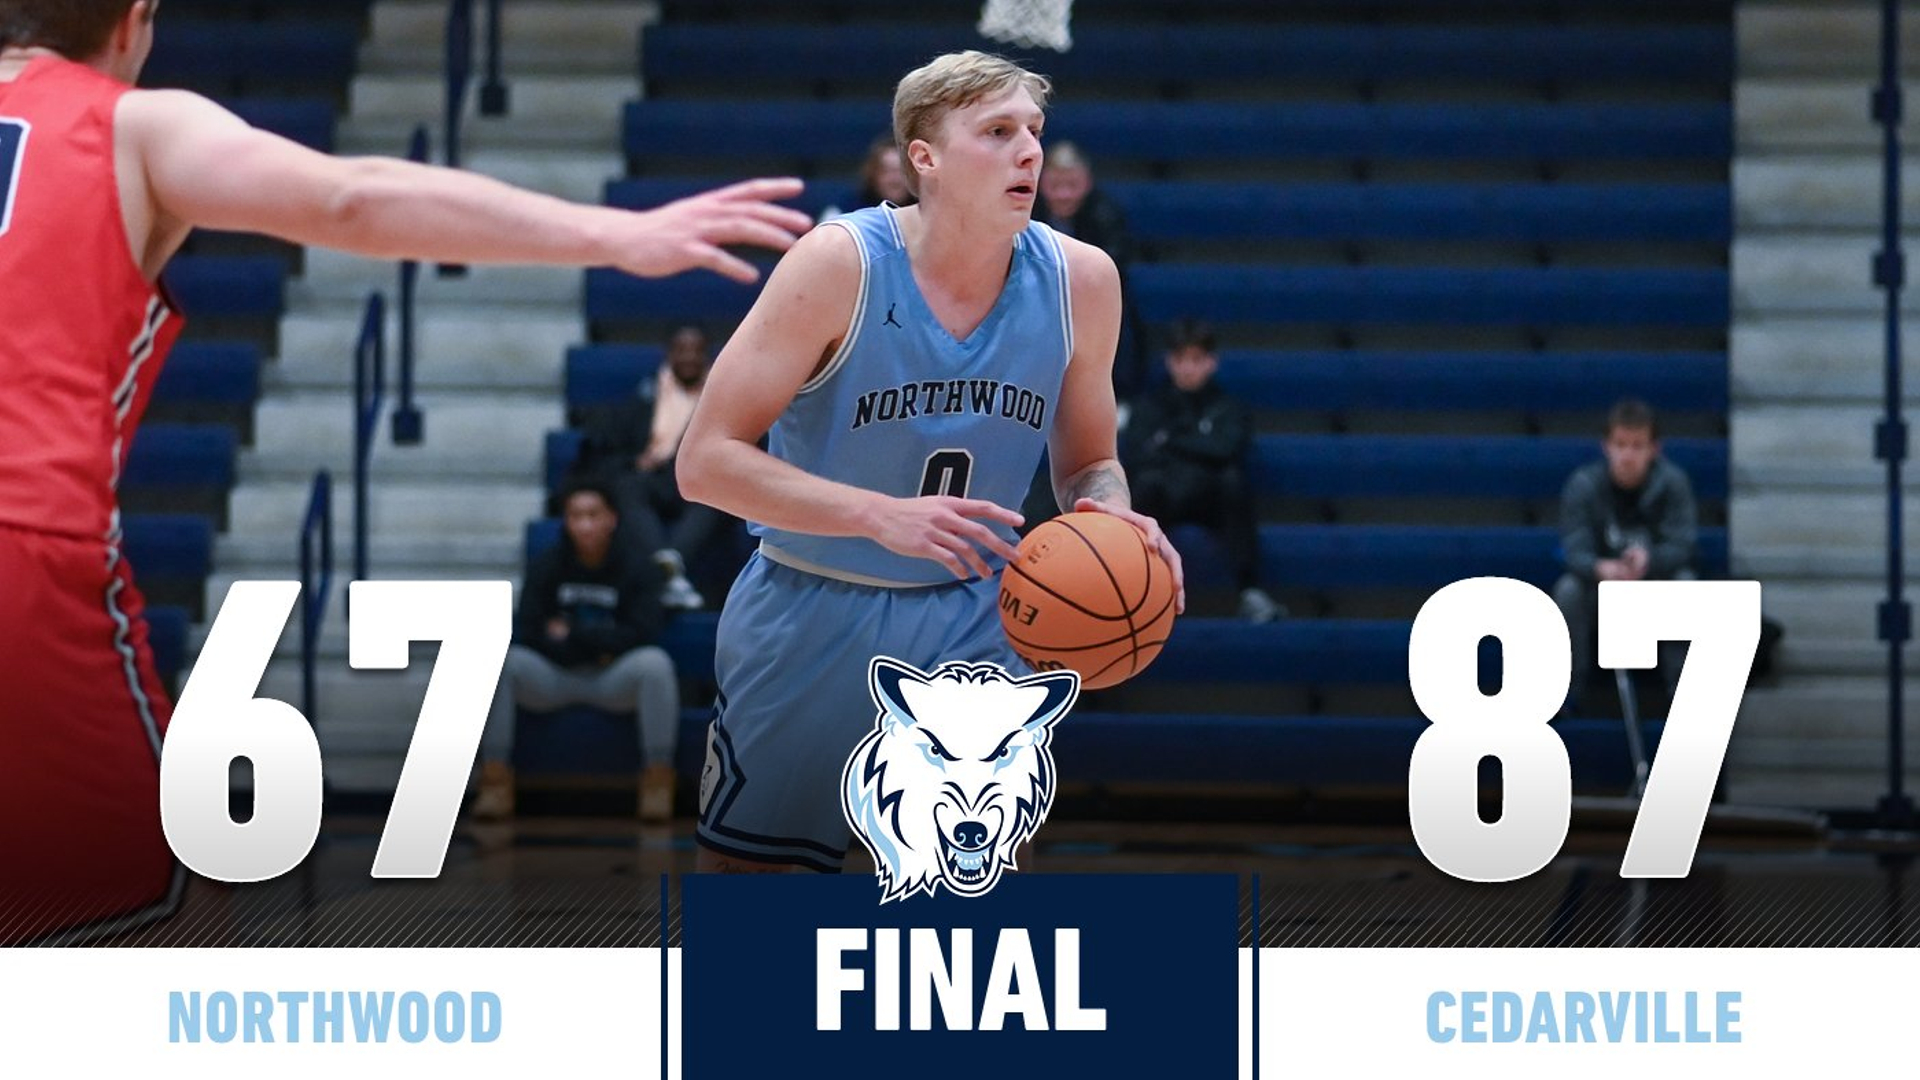 Men's Basketball Loses At Cedarville 87-67